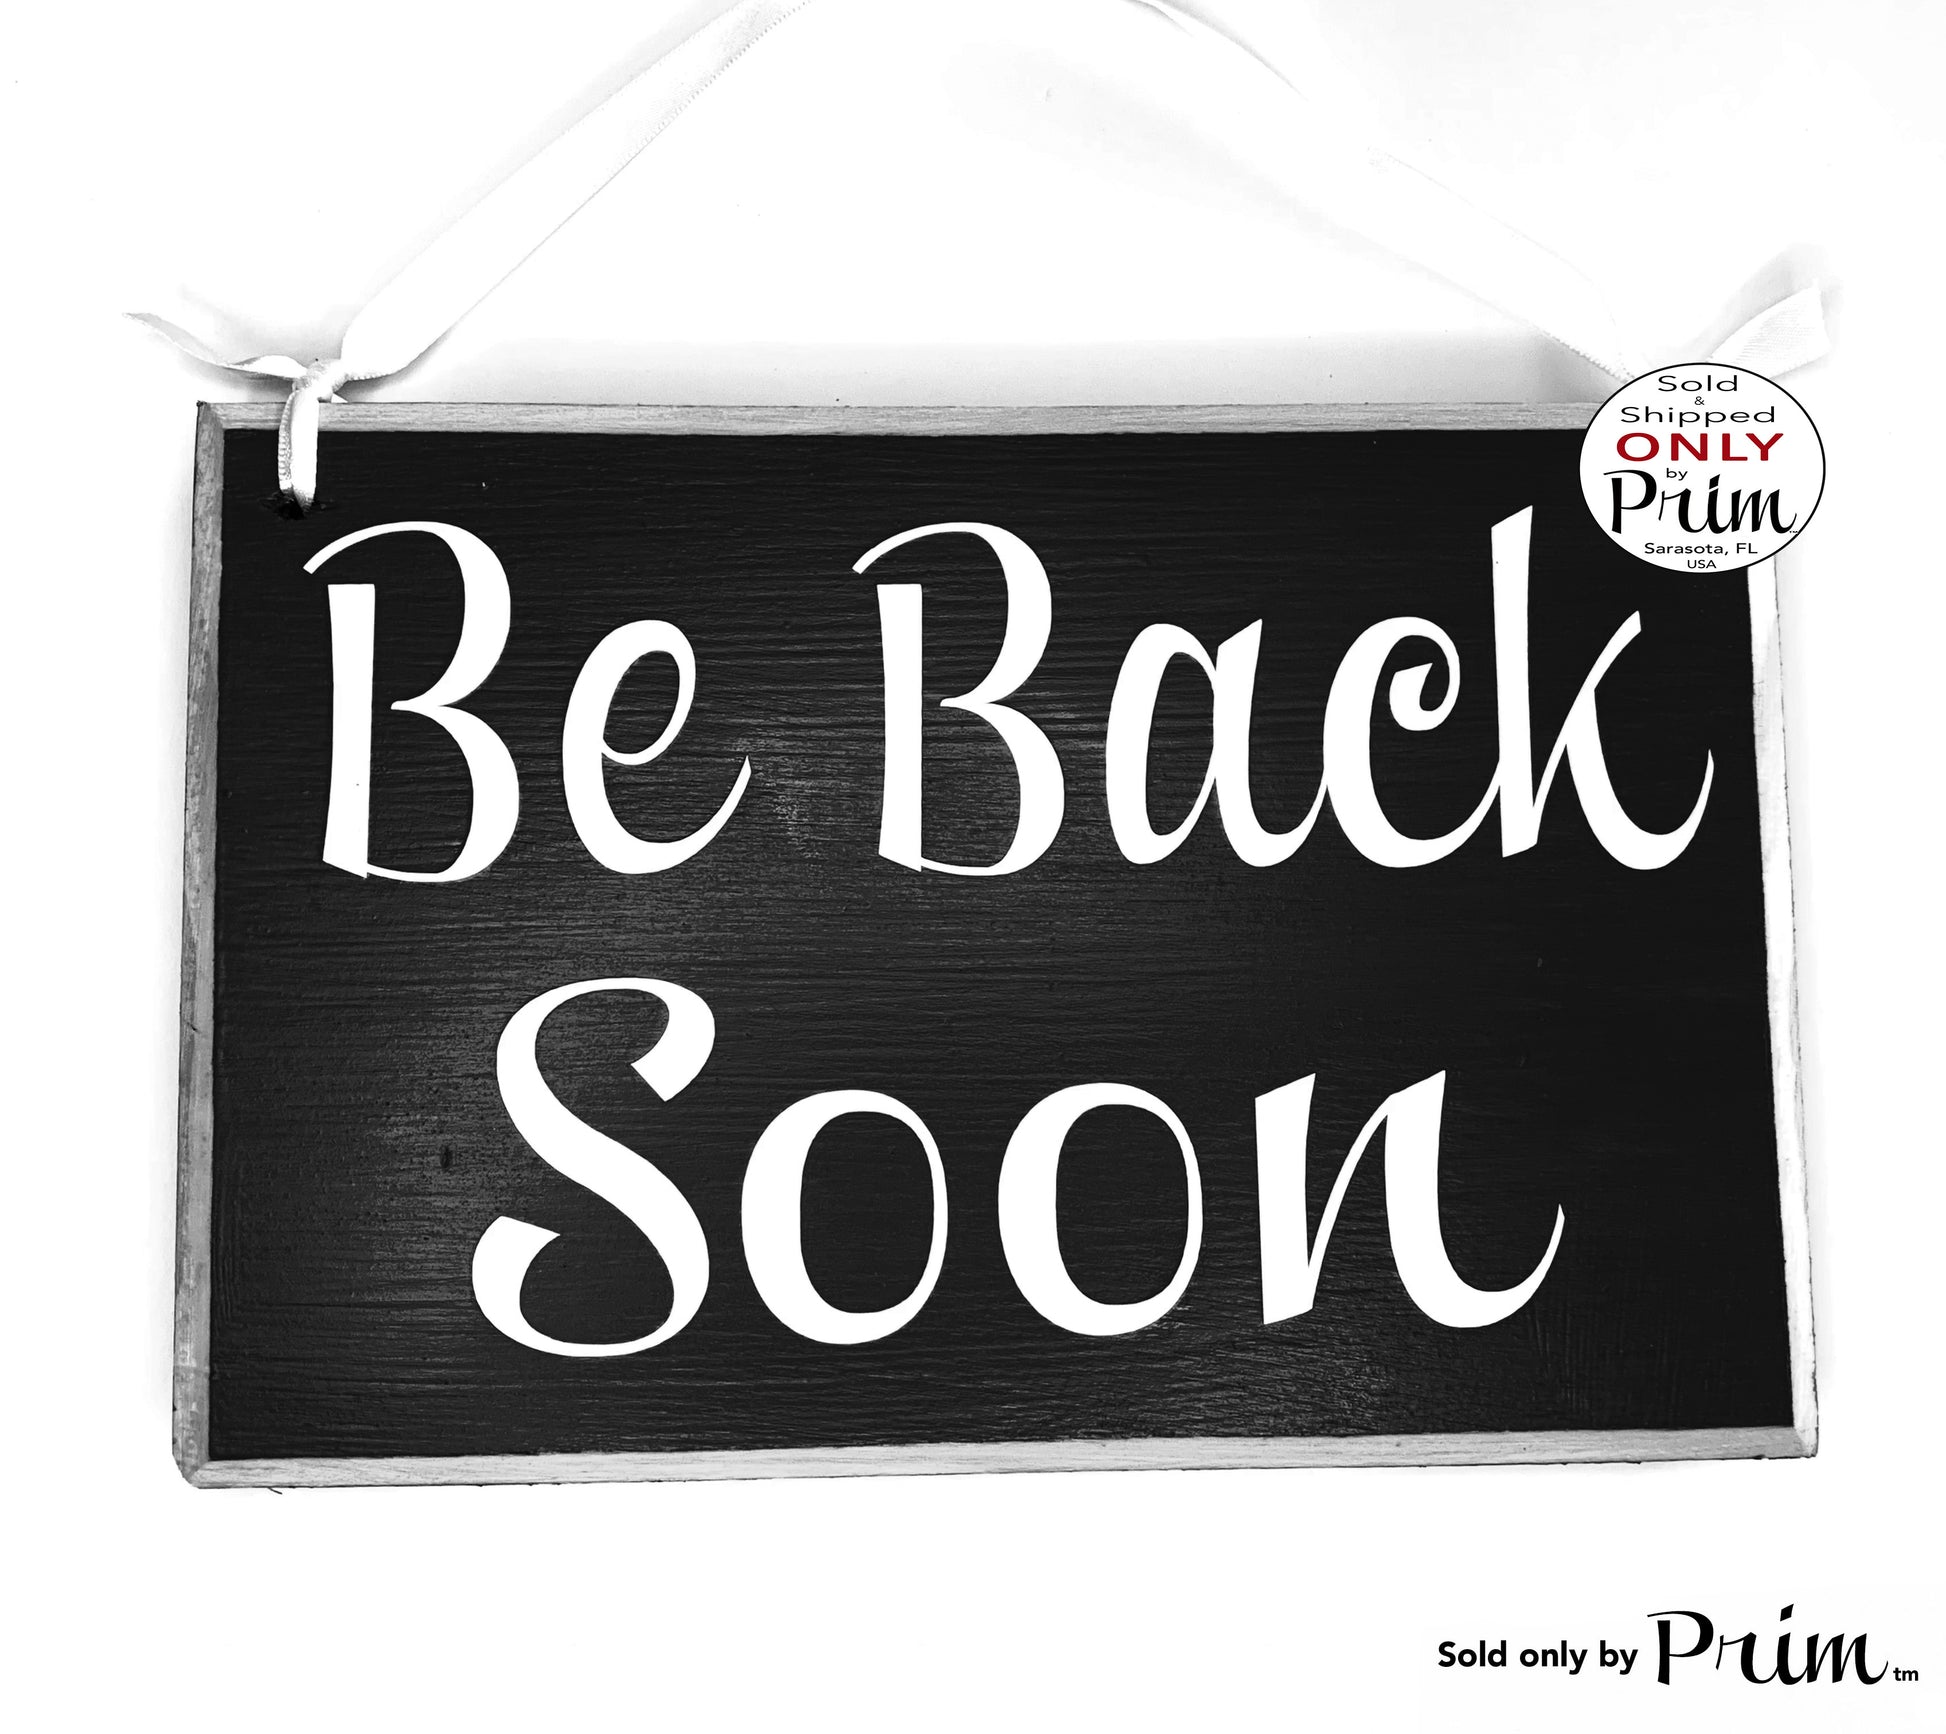 Designs by Prim 8x6 Be Back Soon Custom Wood Sign Be Right Back Running Errands Closed Come Back Soon Please Wait Office Business Private Door Hanger Plaque